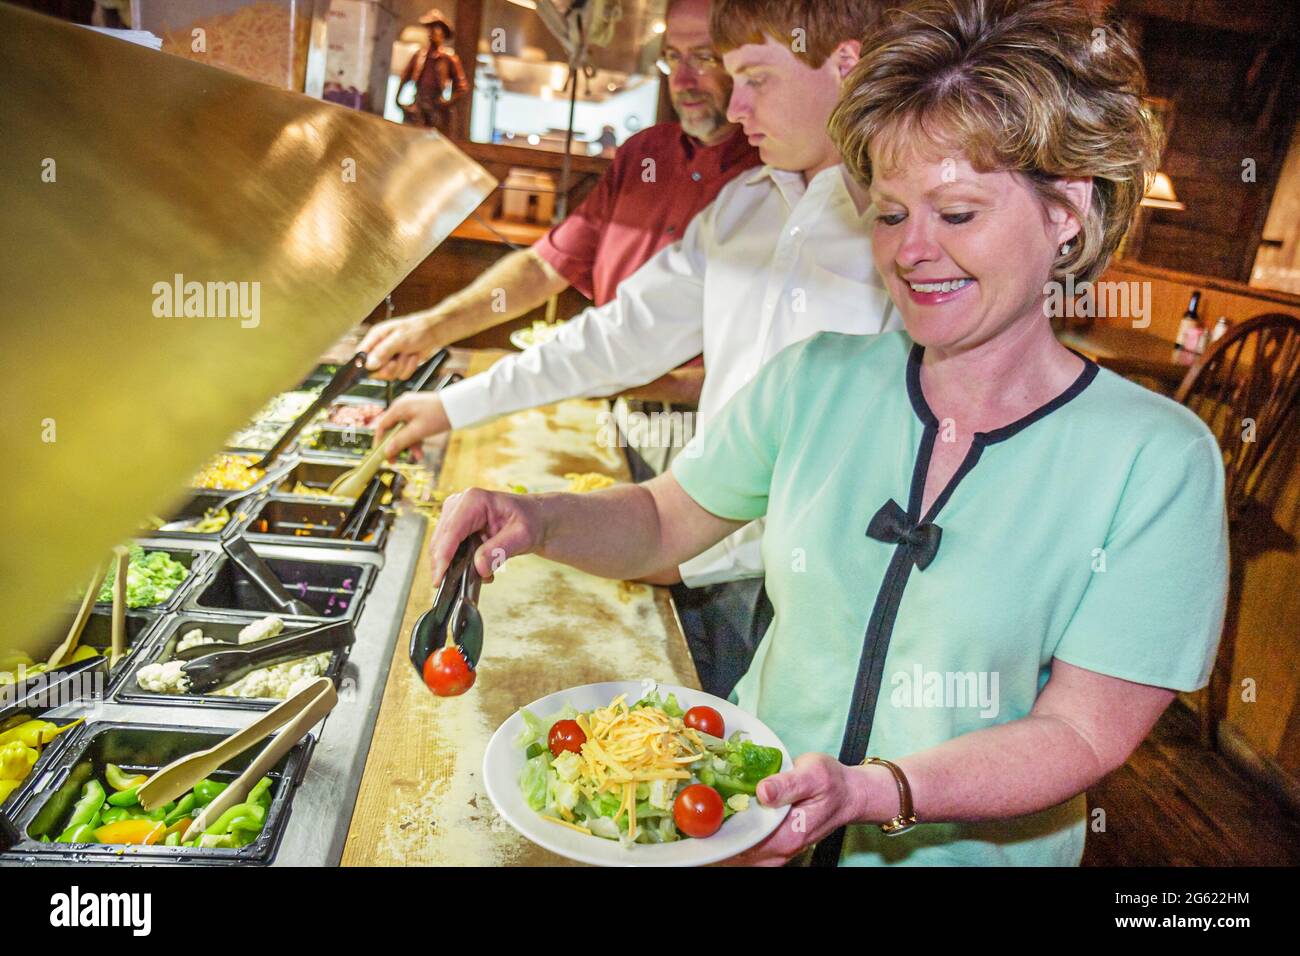 Alabama Moulton Western Sirloin Steakhouse buffet style food,all you can eat family restaurant self serve service woman, Stock Photo